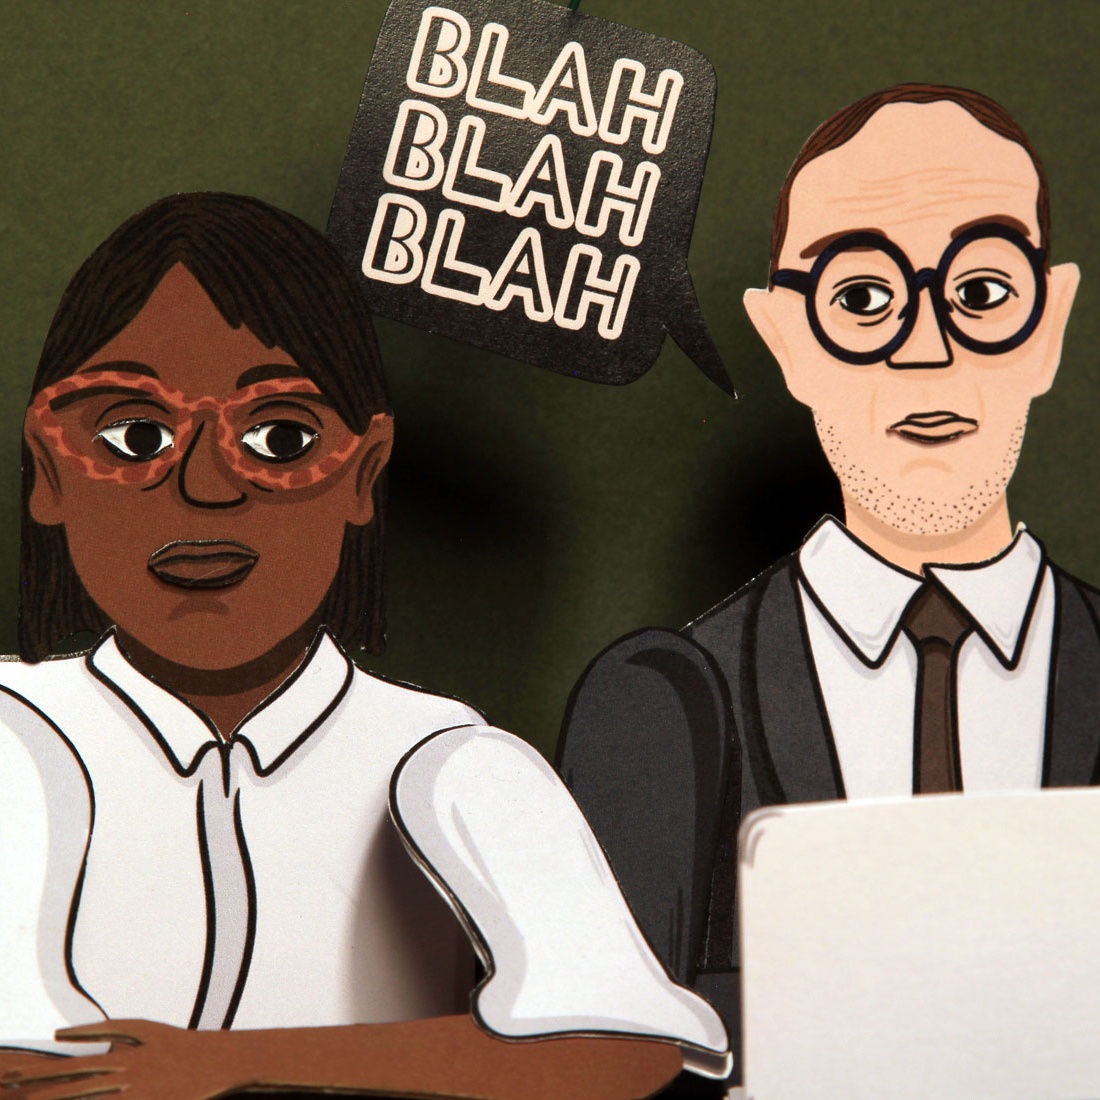 A cartoon of two people in formal office clothing and both wearing glasses. A speech bubble in between them says Blah Blah Blah